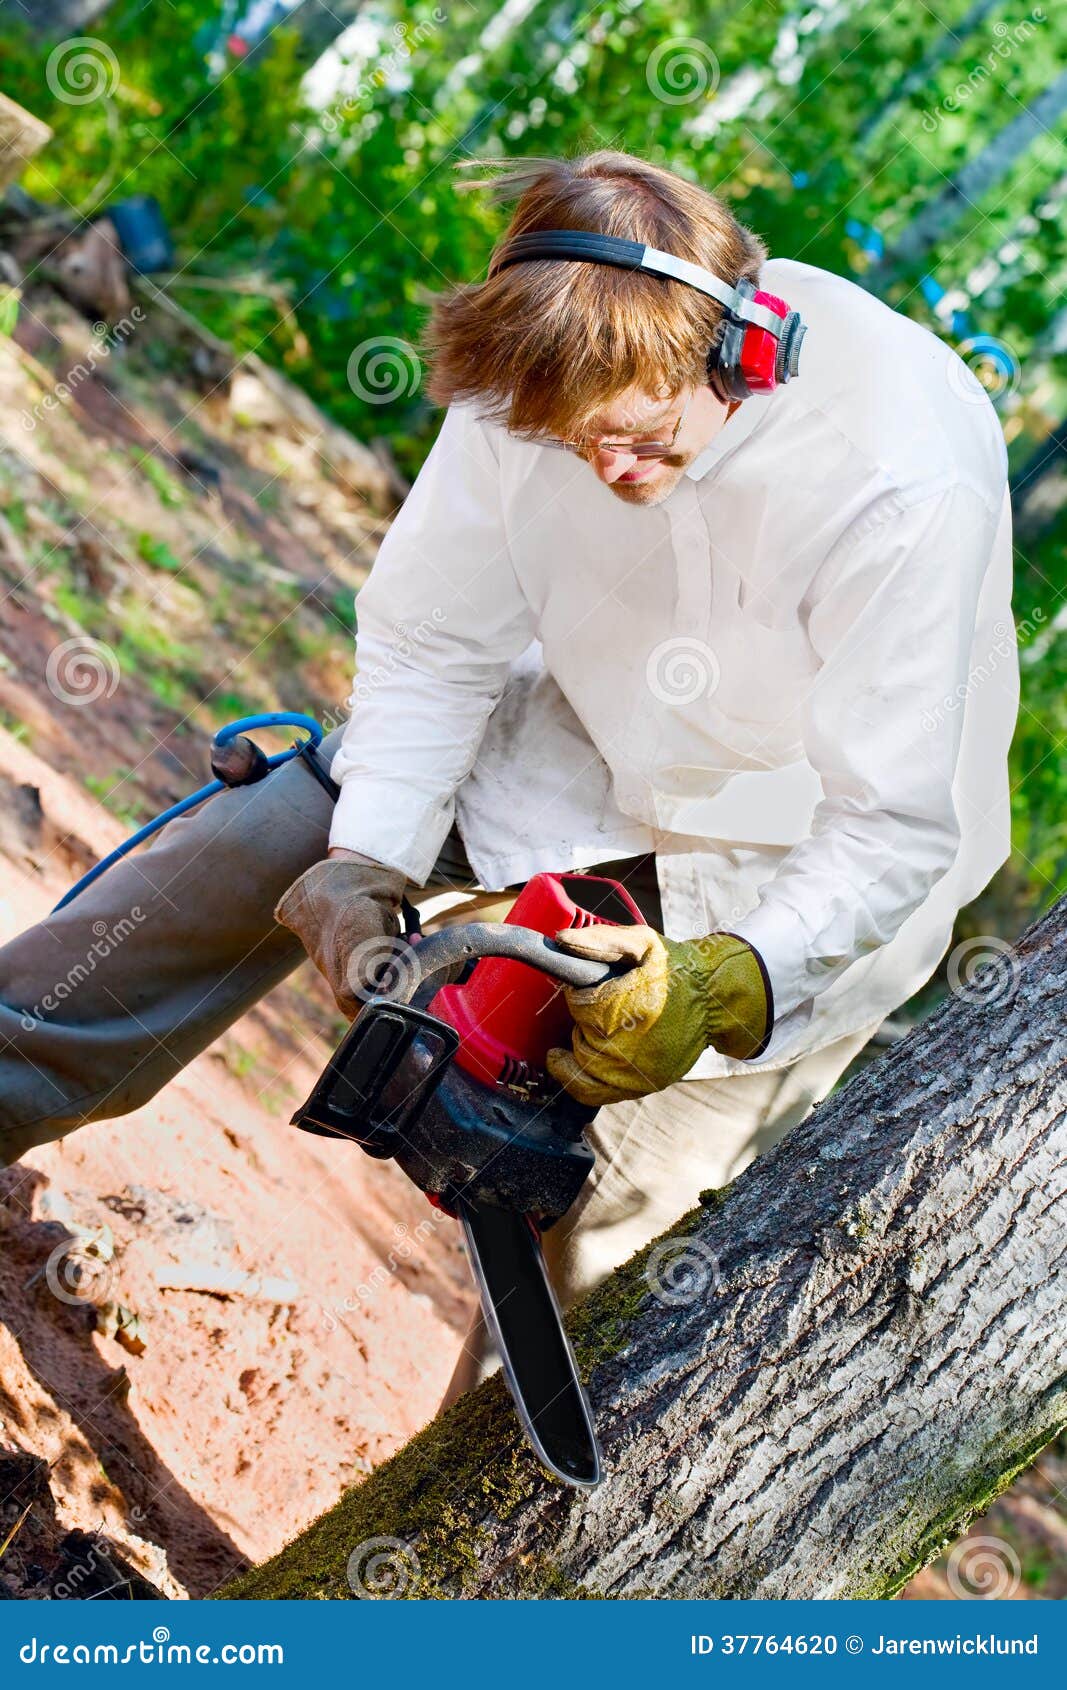 Man cutting tree with chainsaw